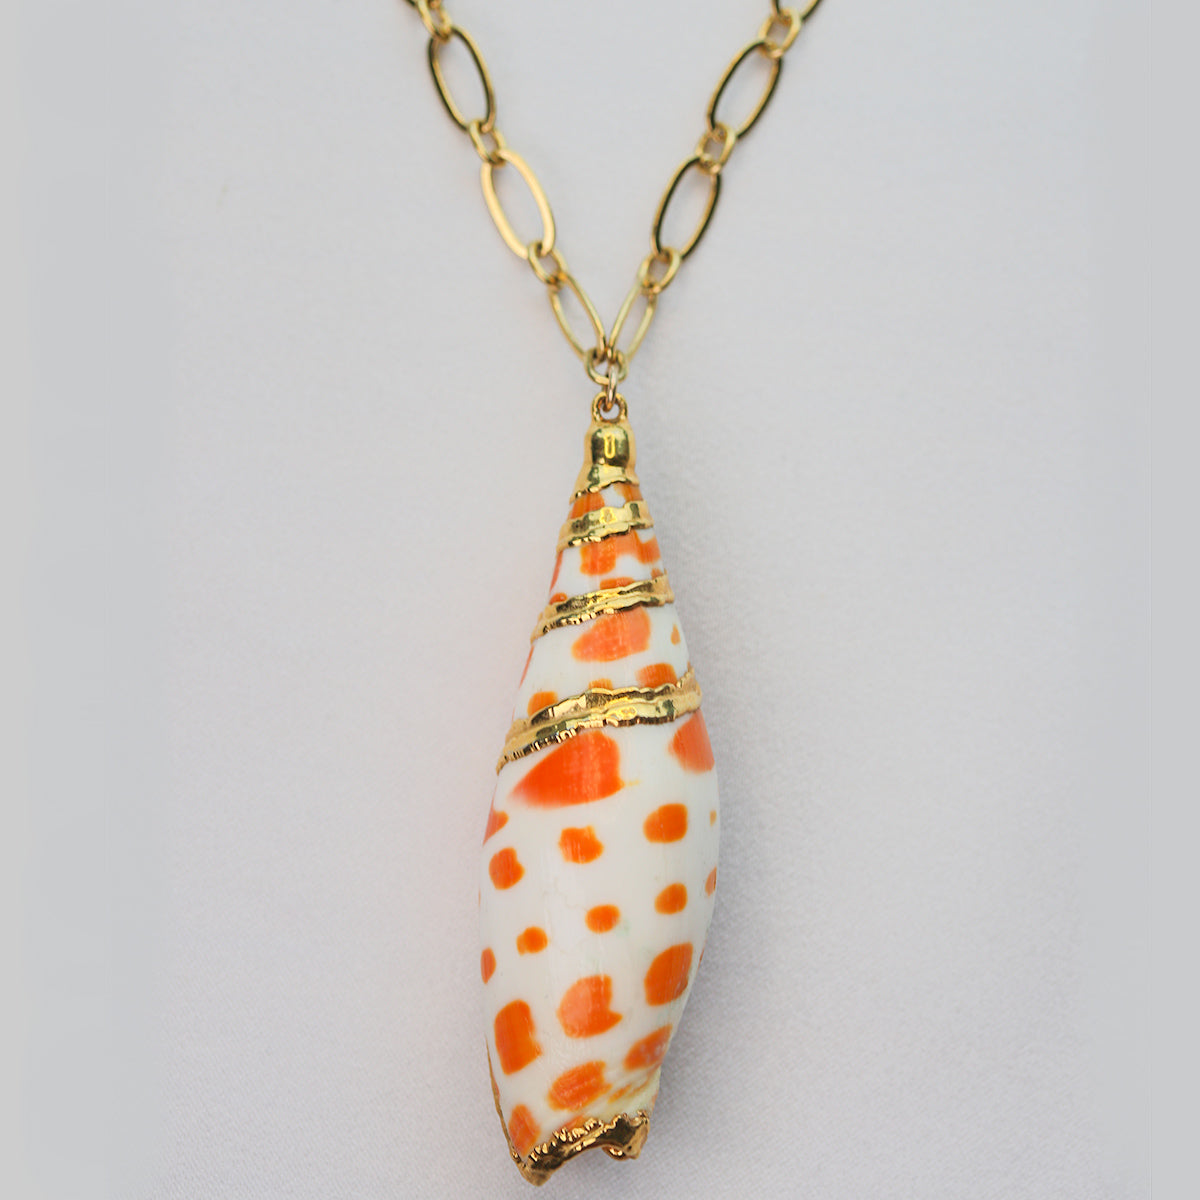 orange spotted spiral shell necklace gold filled chain